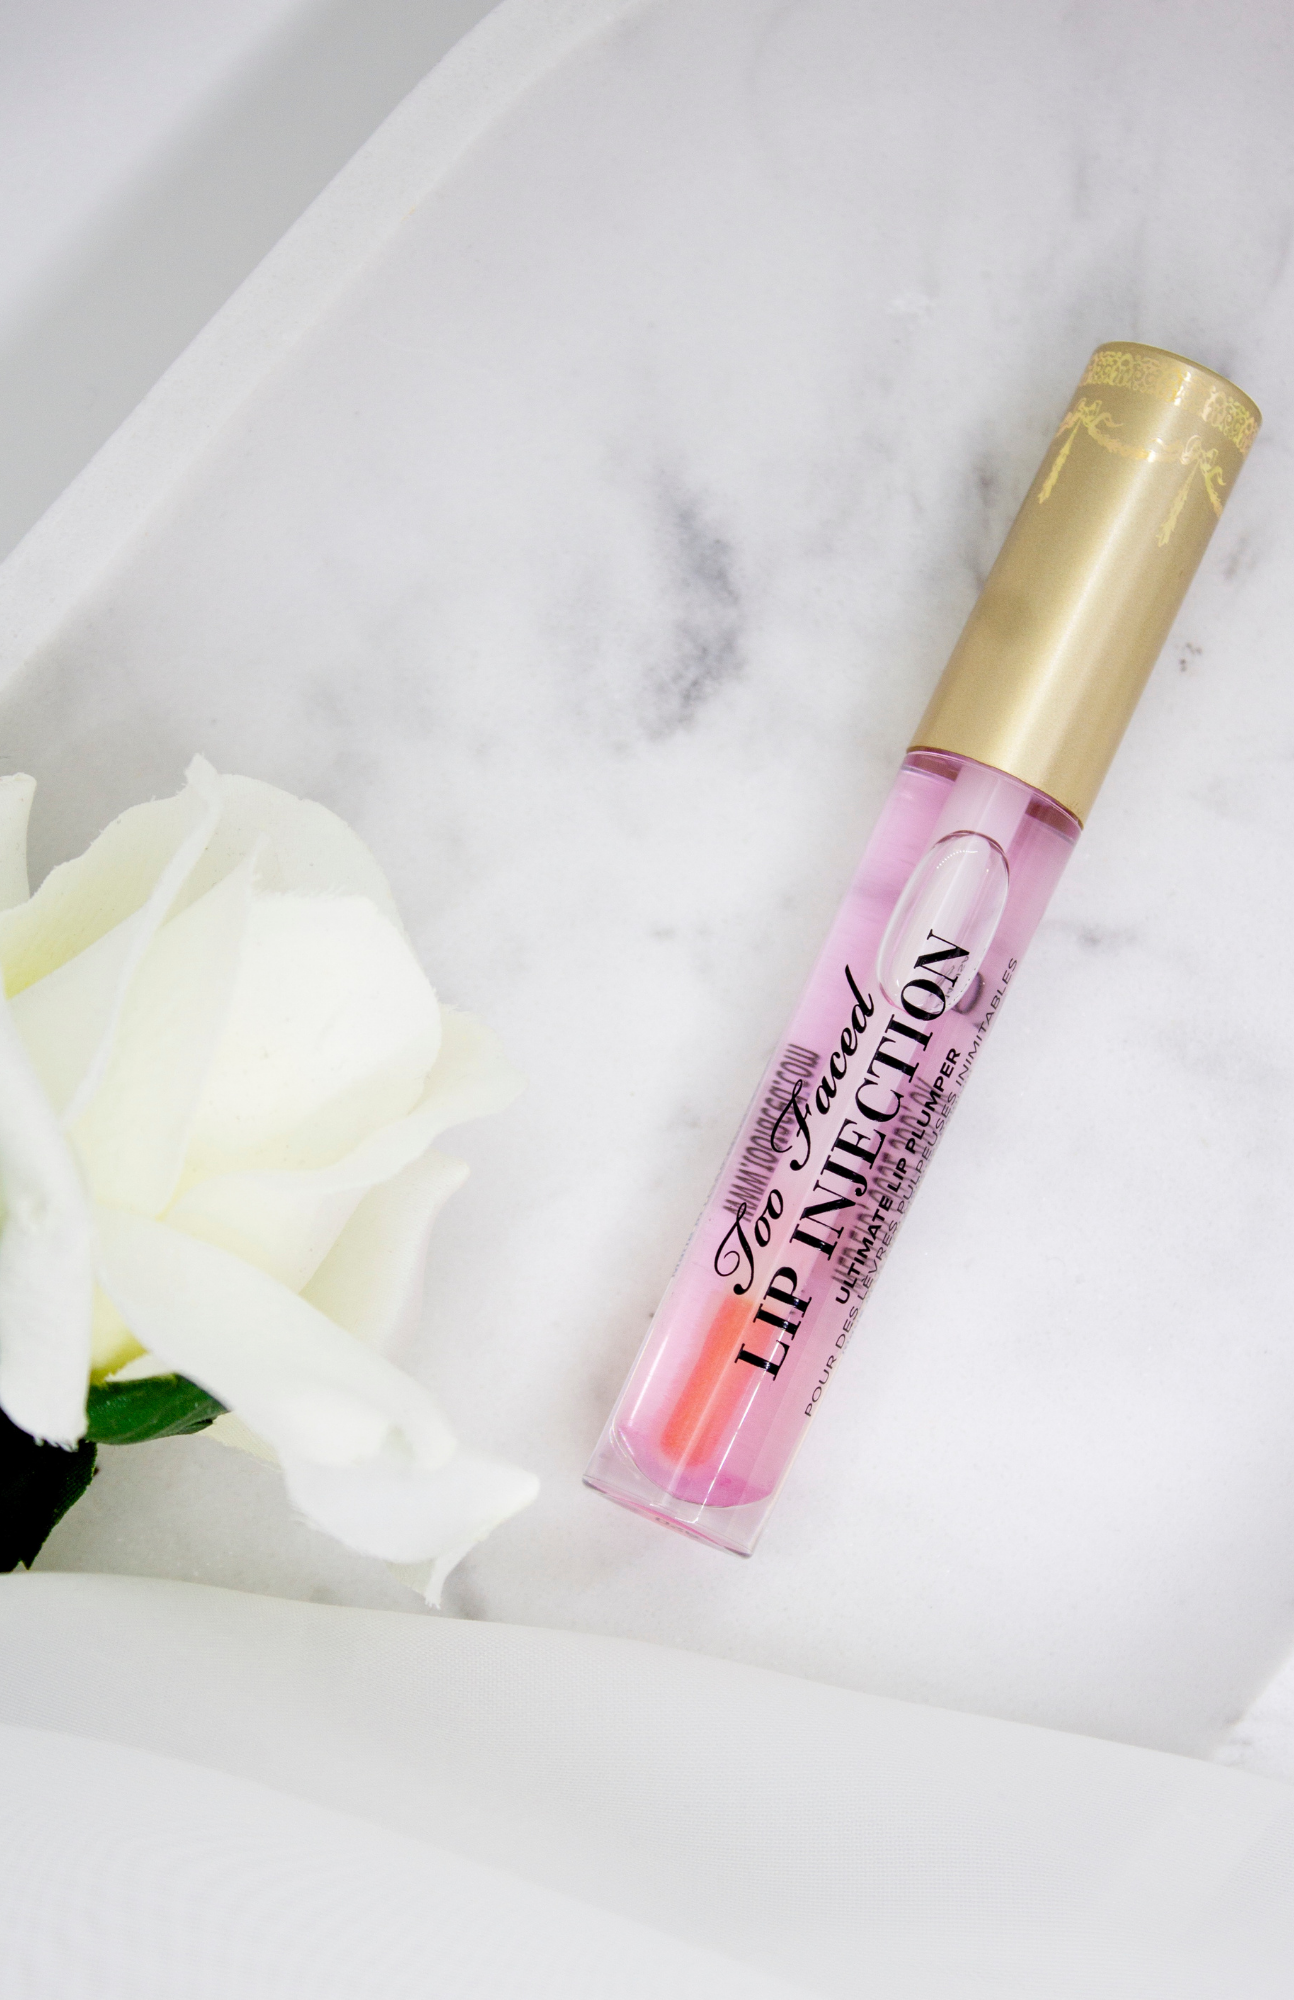 Makeup Products: Plump and Pout with Too Faced Lip Plumper - Presented on a White Marble Dish, Adorned with a Delicate White Rose. Elevate Your Beauty Game!